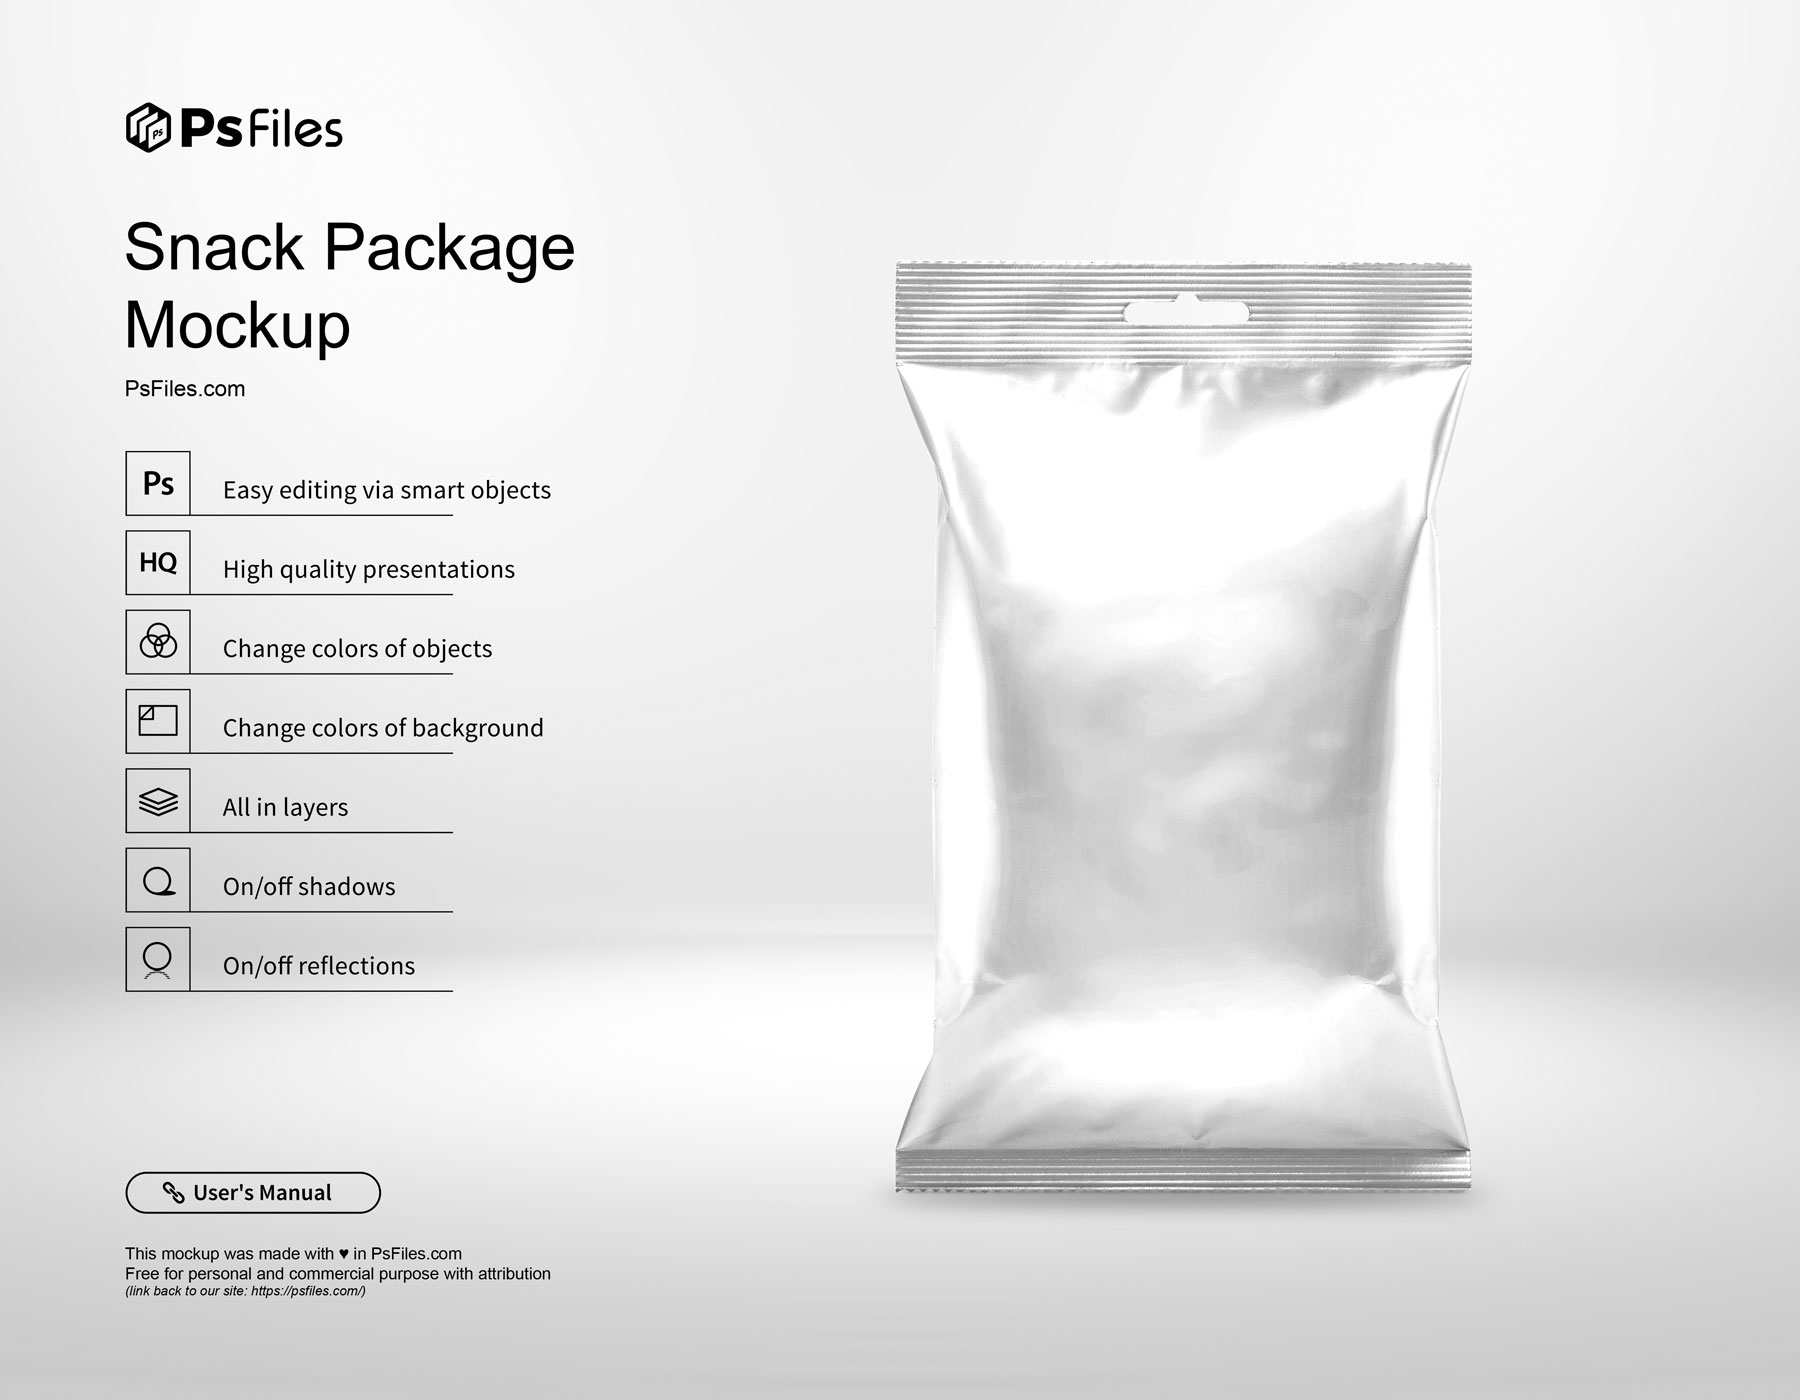 PsFiles Snack Packet Packaging Mockup with Hanging Hole